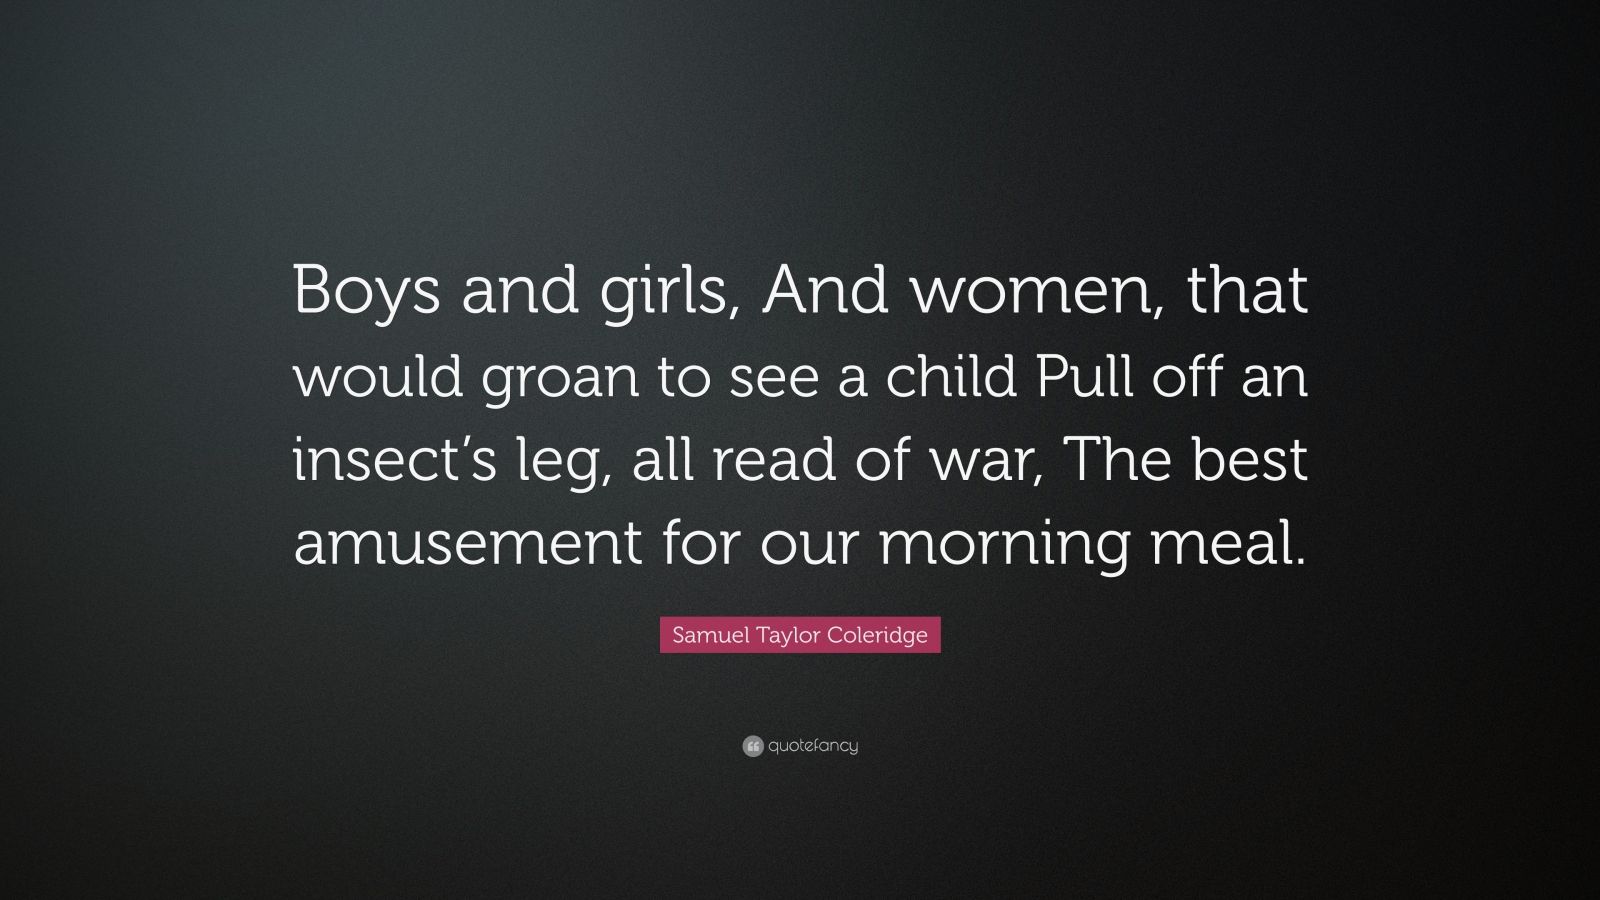 Samuel Taylor Coleridge Quote: “Boys and girls, And women, that would groan to see a ...1600 x 900